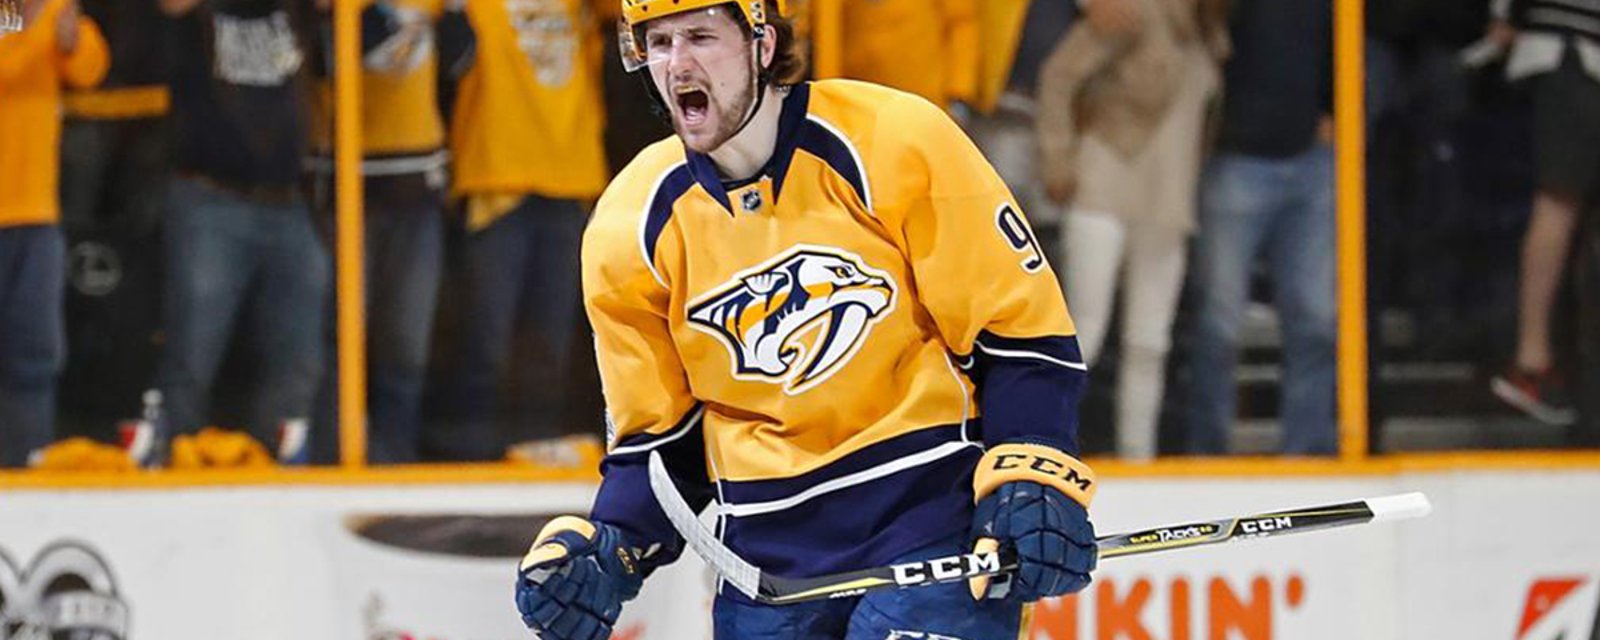 Report: The worst is confirmed for Forsberg and the Preds